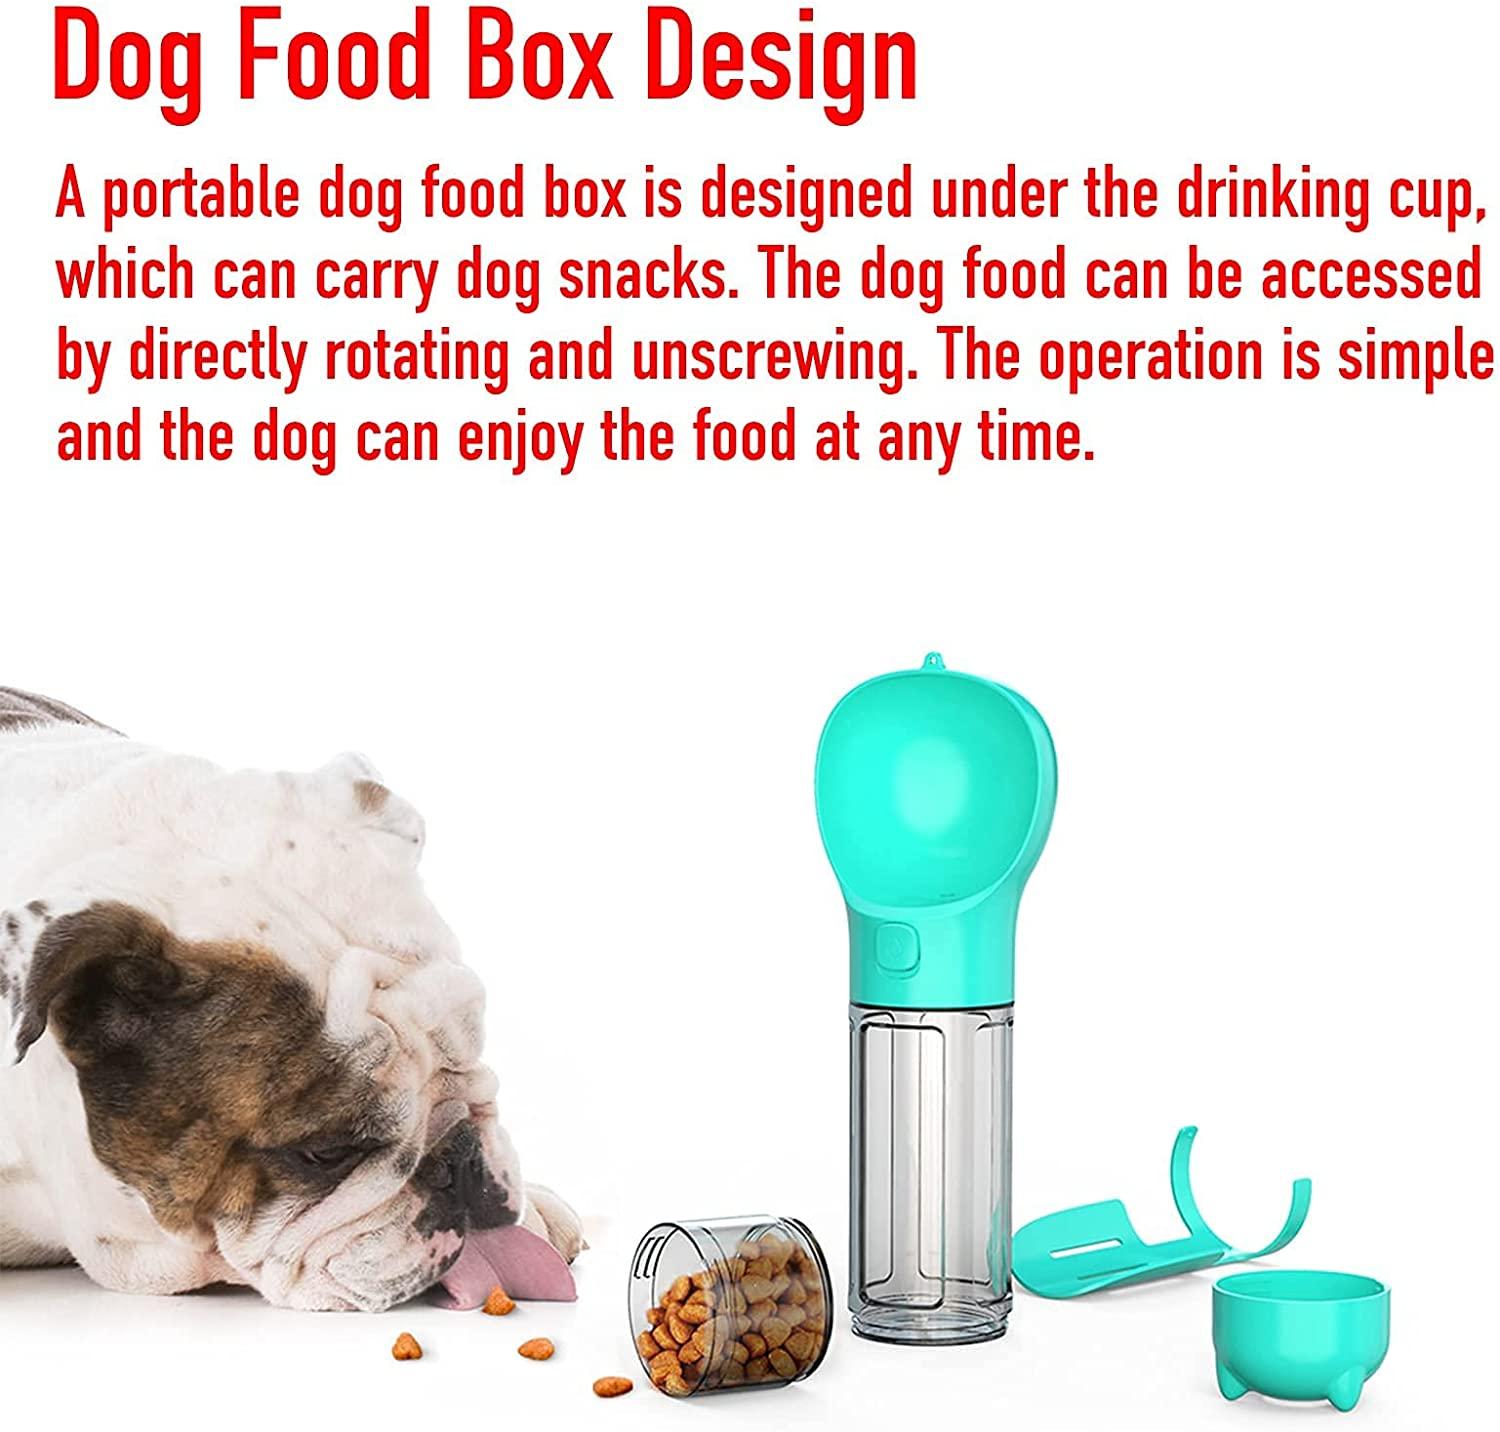 Dog Water Bottle 4 in 1 Portable Pet Water Bowl Dispenser with Dog Whistle,  Pet Travel 10OZ (300ML) Water Cup with Food Container, Poop Collection  Shovel, Garbage Bag for Dogs Cats Walking